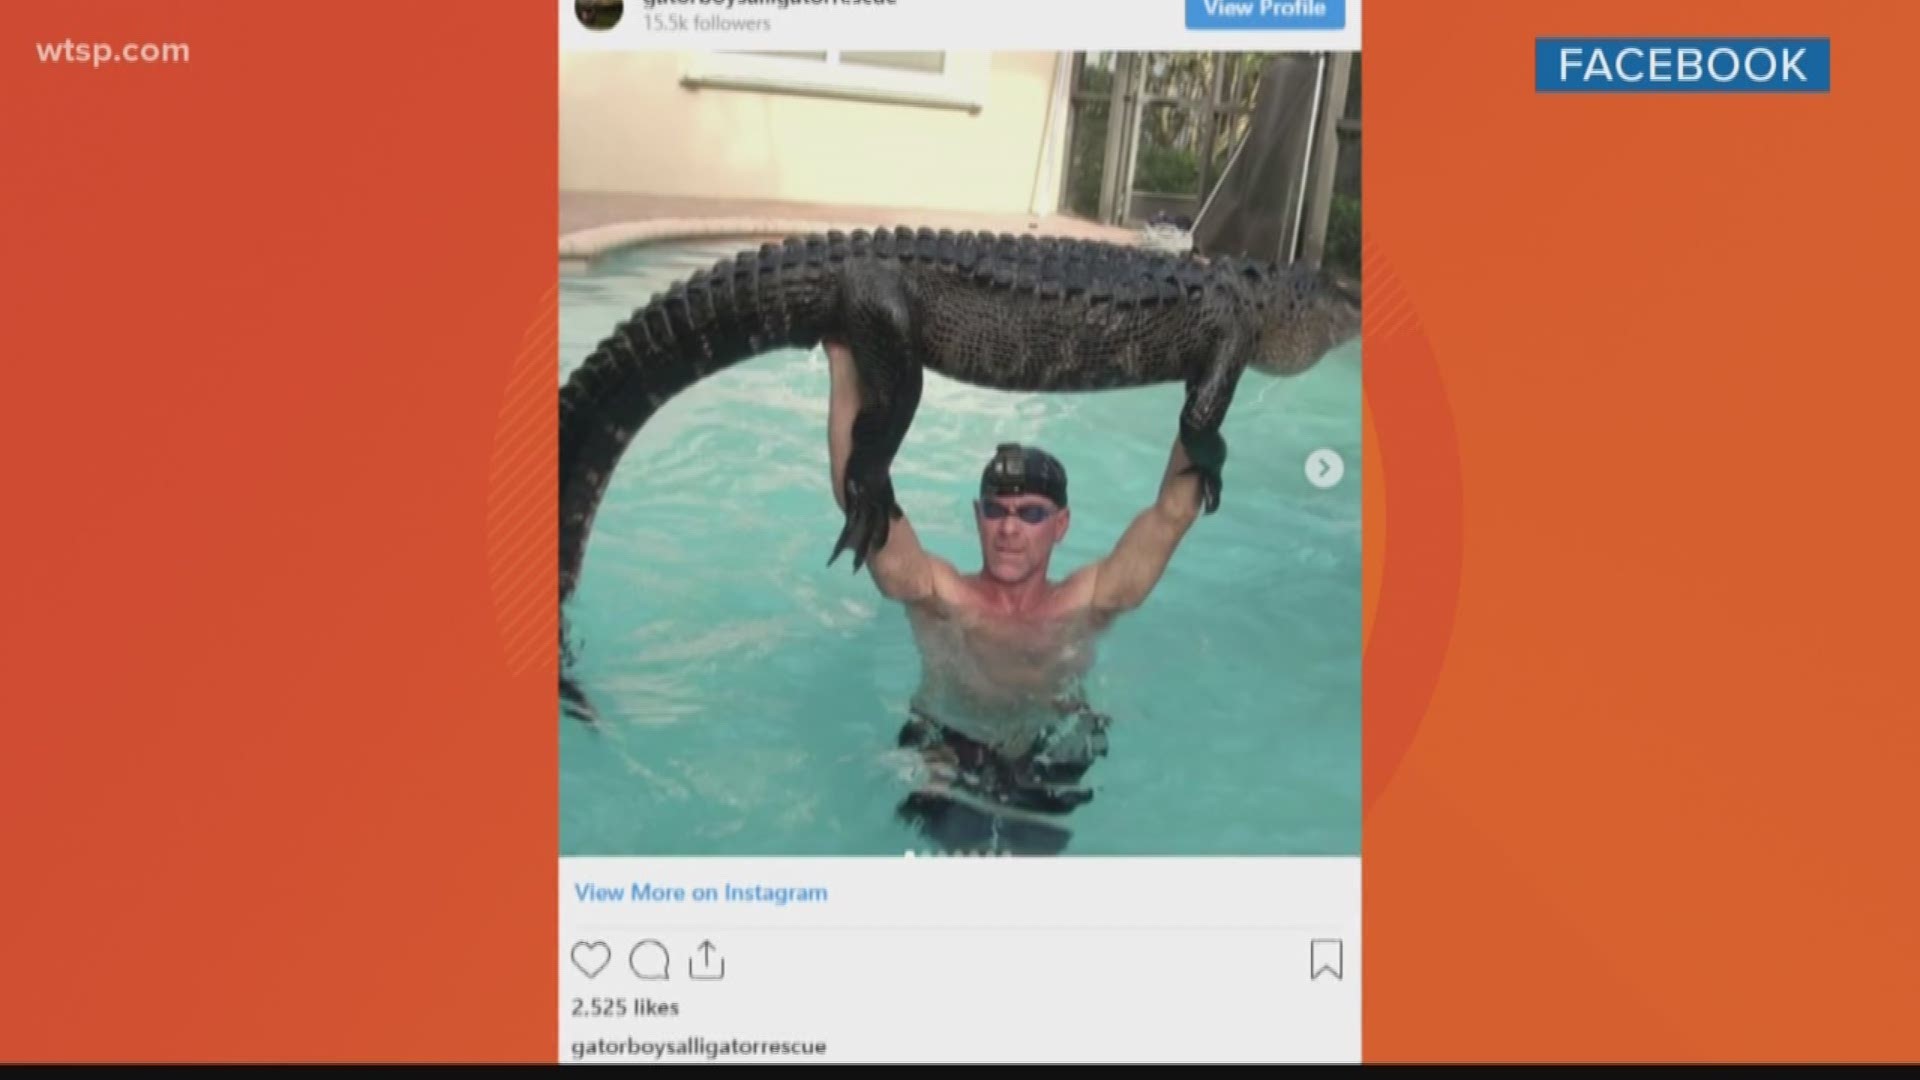 A South Florida man joined an alligator in a swimming pool to coax it out. Paul Bedard of Gator Boys Alligator Rescue posted pictures on Instagram of his removal of